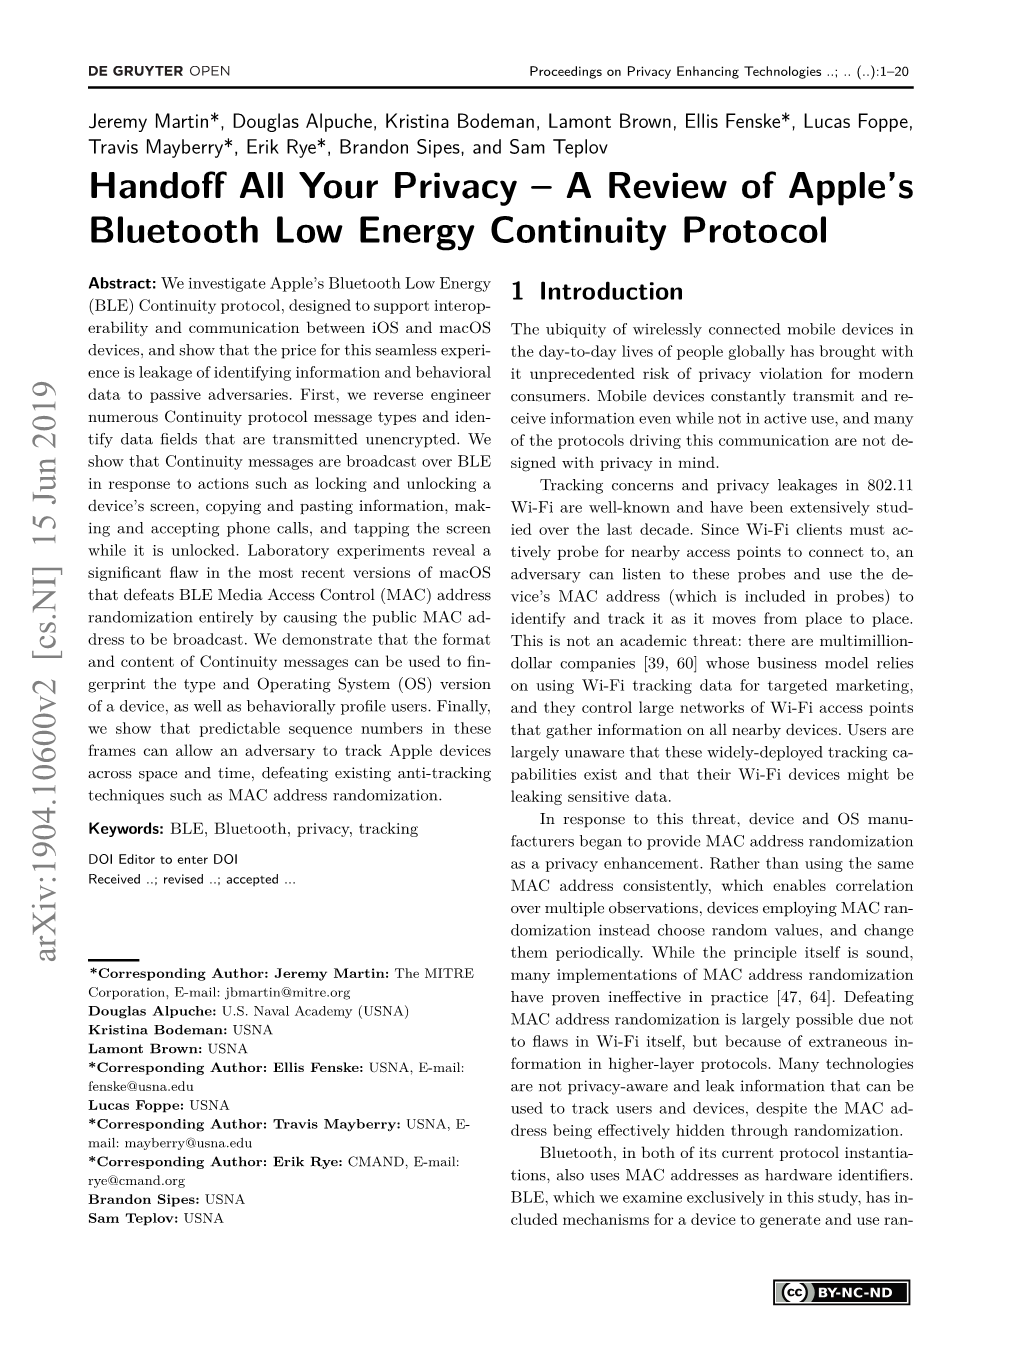 Handoff All Your Privacy – a Review of Apple's Bluetooth Low Energy Continuity Protocol